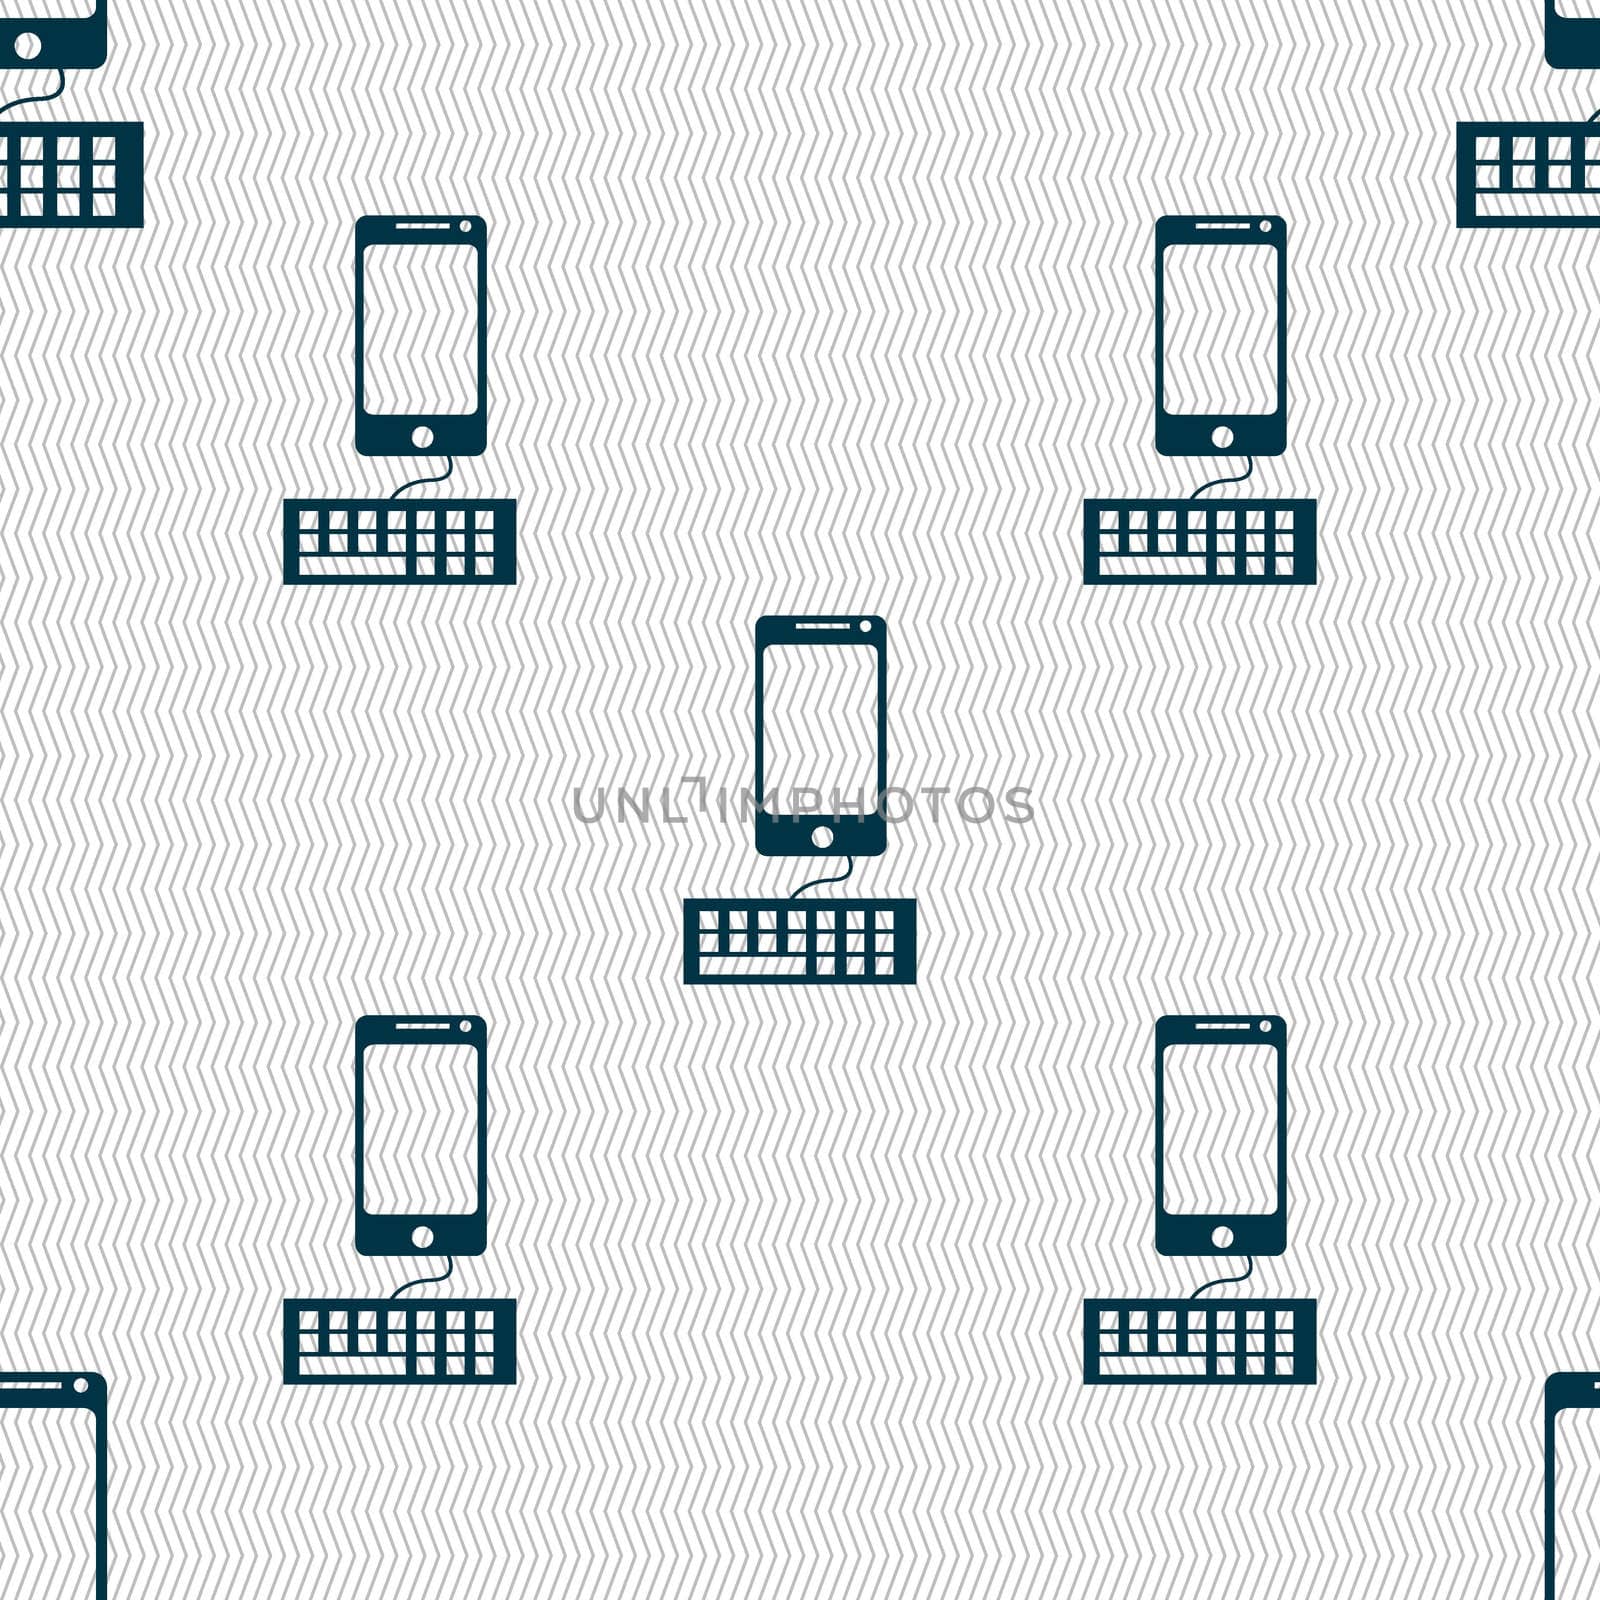 Computer keyboard and smatphone Icon. Seamless abstract background with geometric shapes. illustration